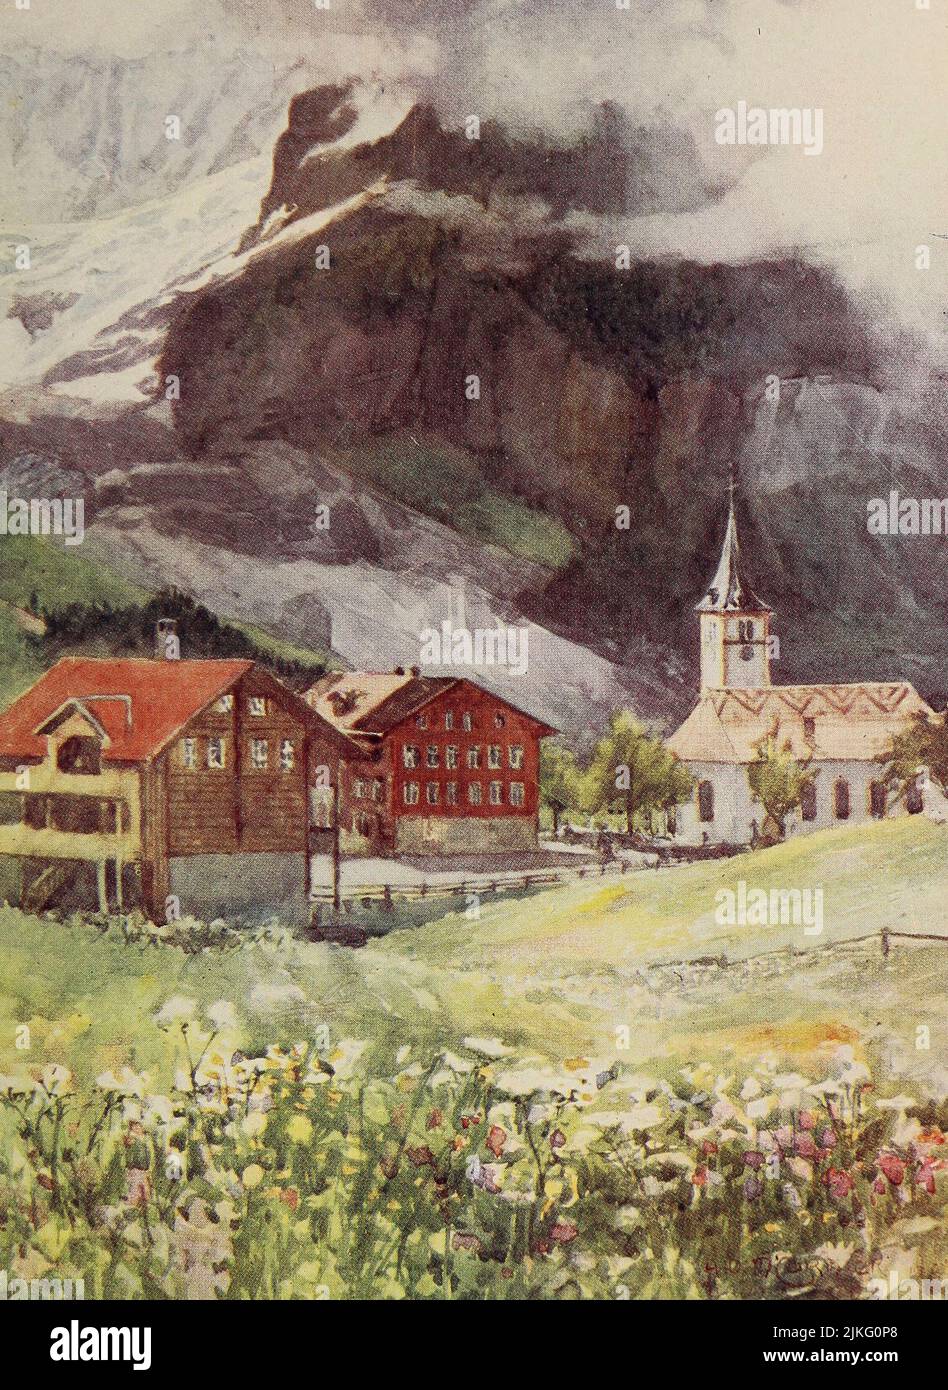 Lower Glacier and Grindelwald Church Painted by A. D. McCormick from the book ' The Alps ' by Sir William Martin Conway,  Publication date 1904 Publisher London : Adam and Charles Black Arthur David McCormick FRGS (Coleraine 14 October 1860 – 1943) was a notable British illustrator and painter of landscapes, historical scenes, naval subjects, and genre scenes. Stock Photo